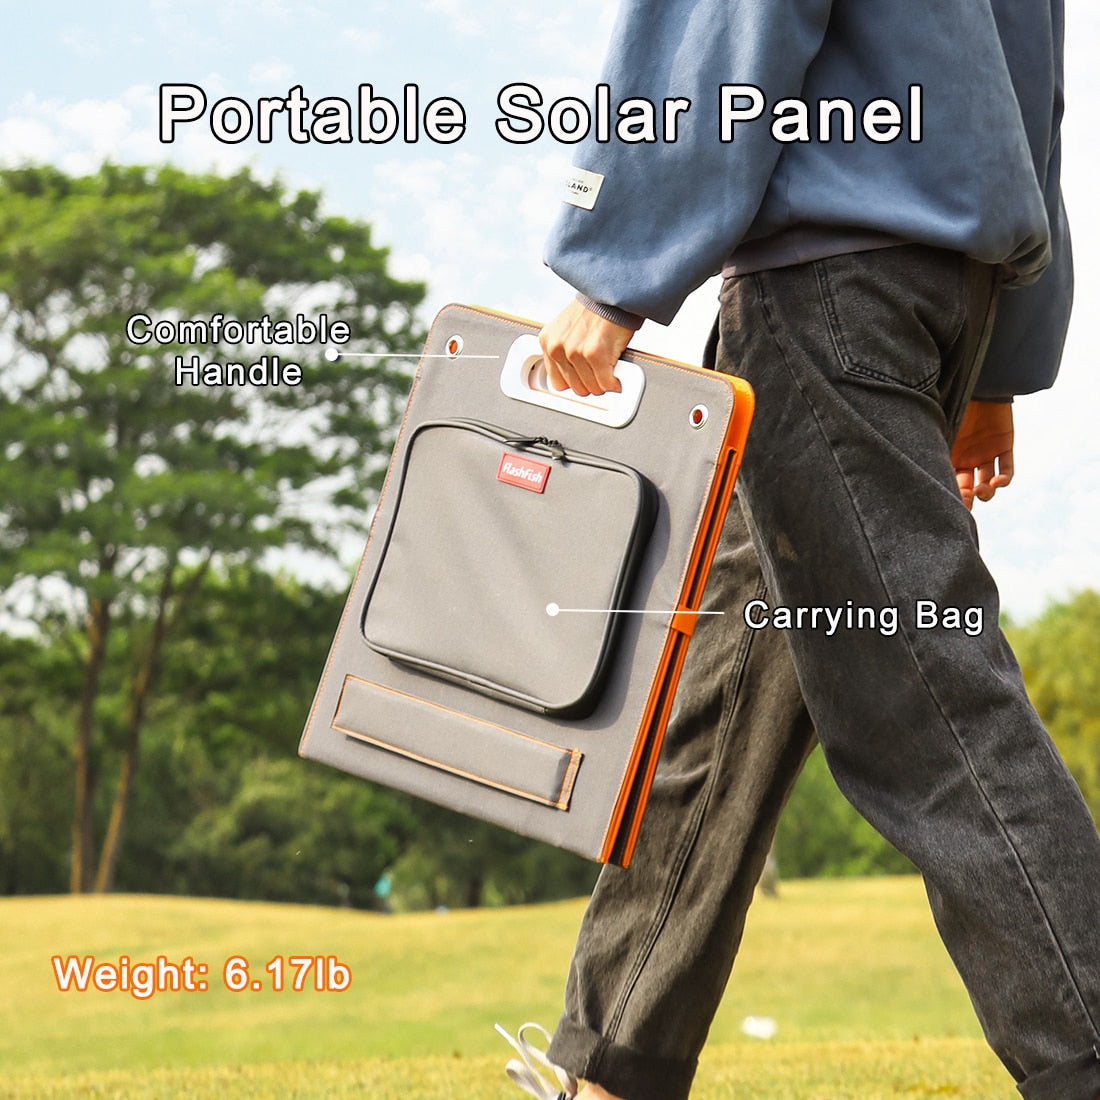 Portable Solar Panel Comfortable Handle Carrying Bag Weight: 6.1